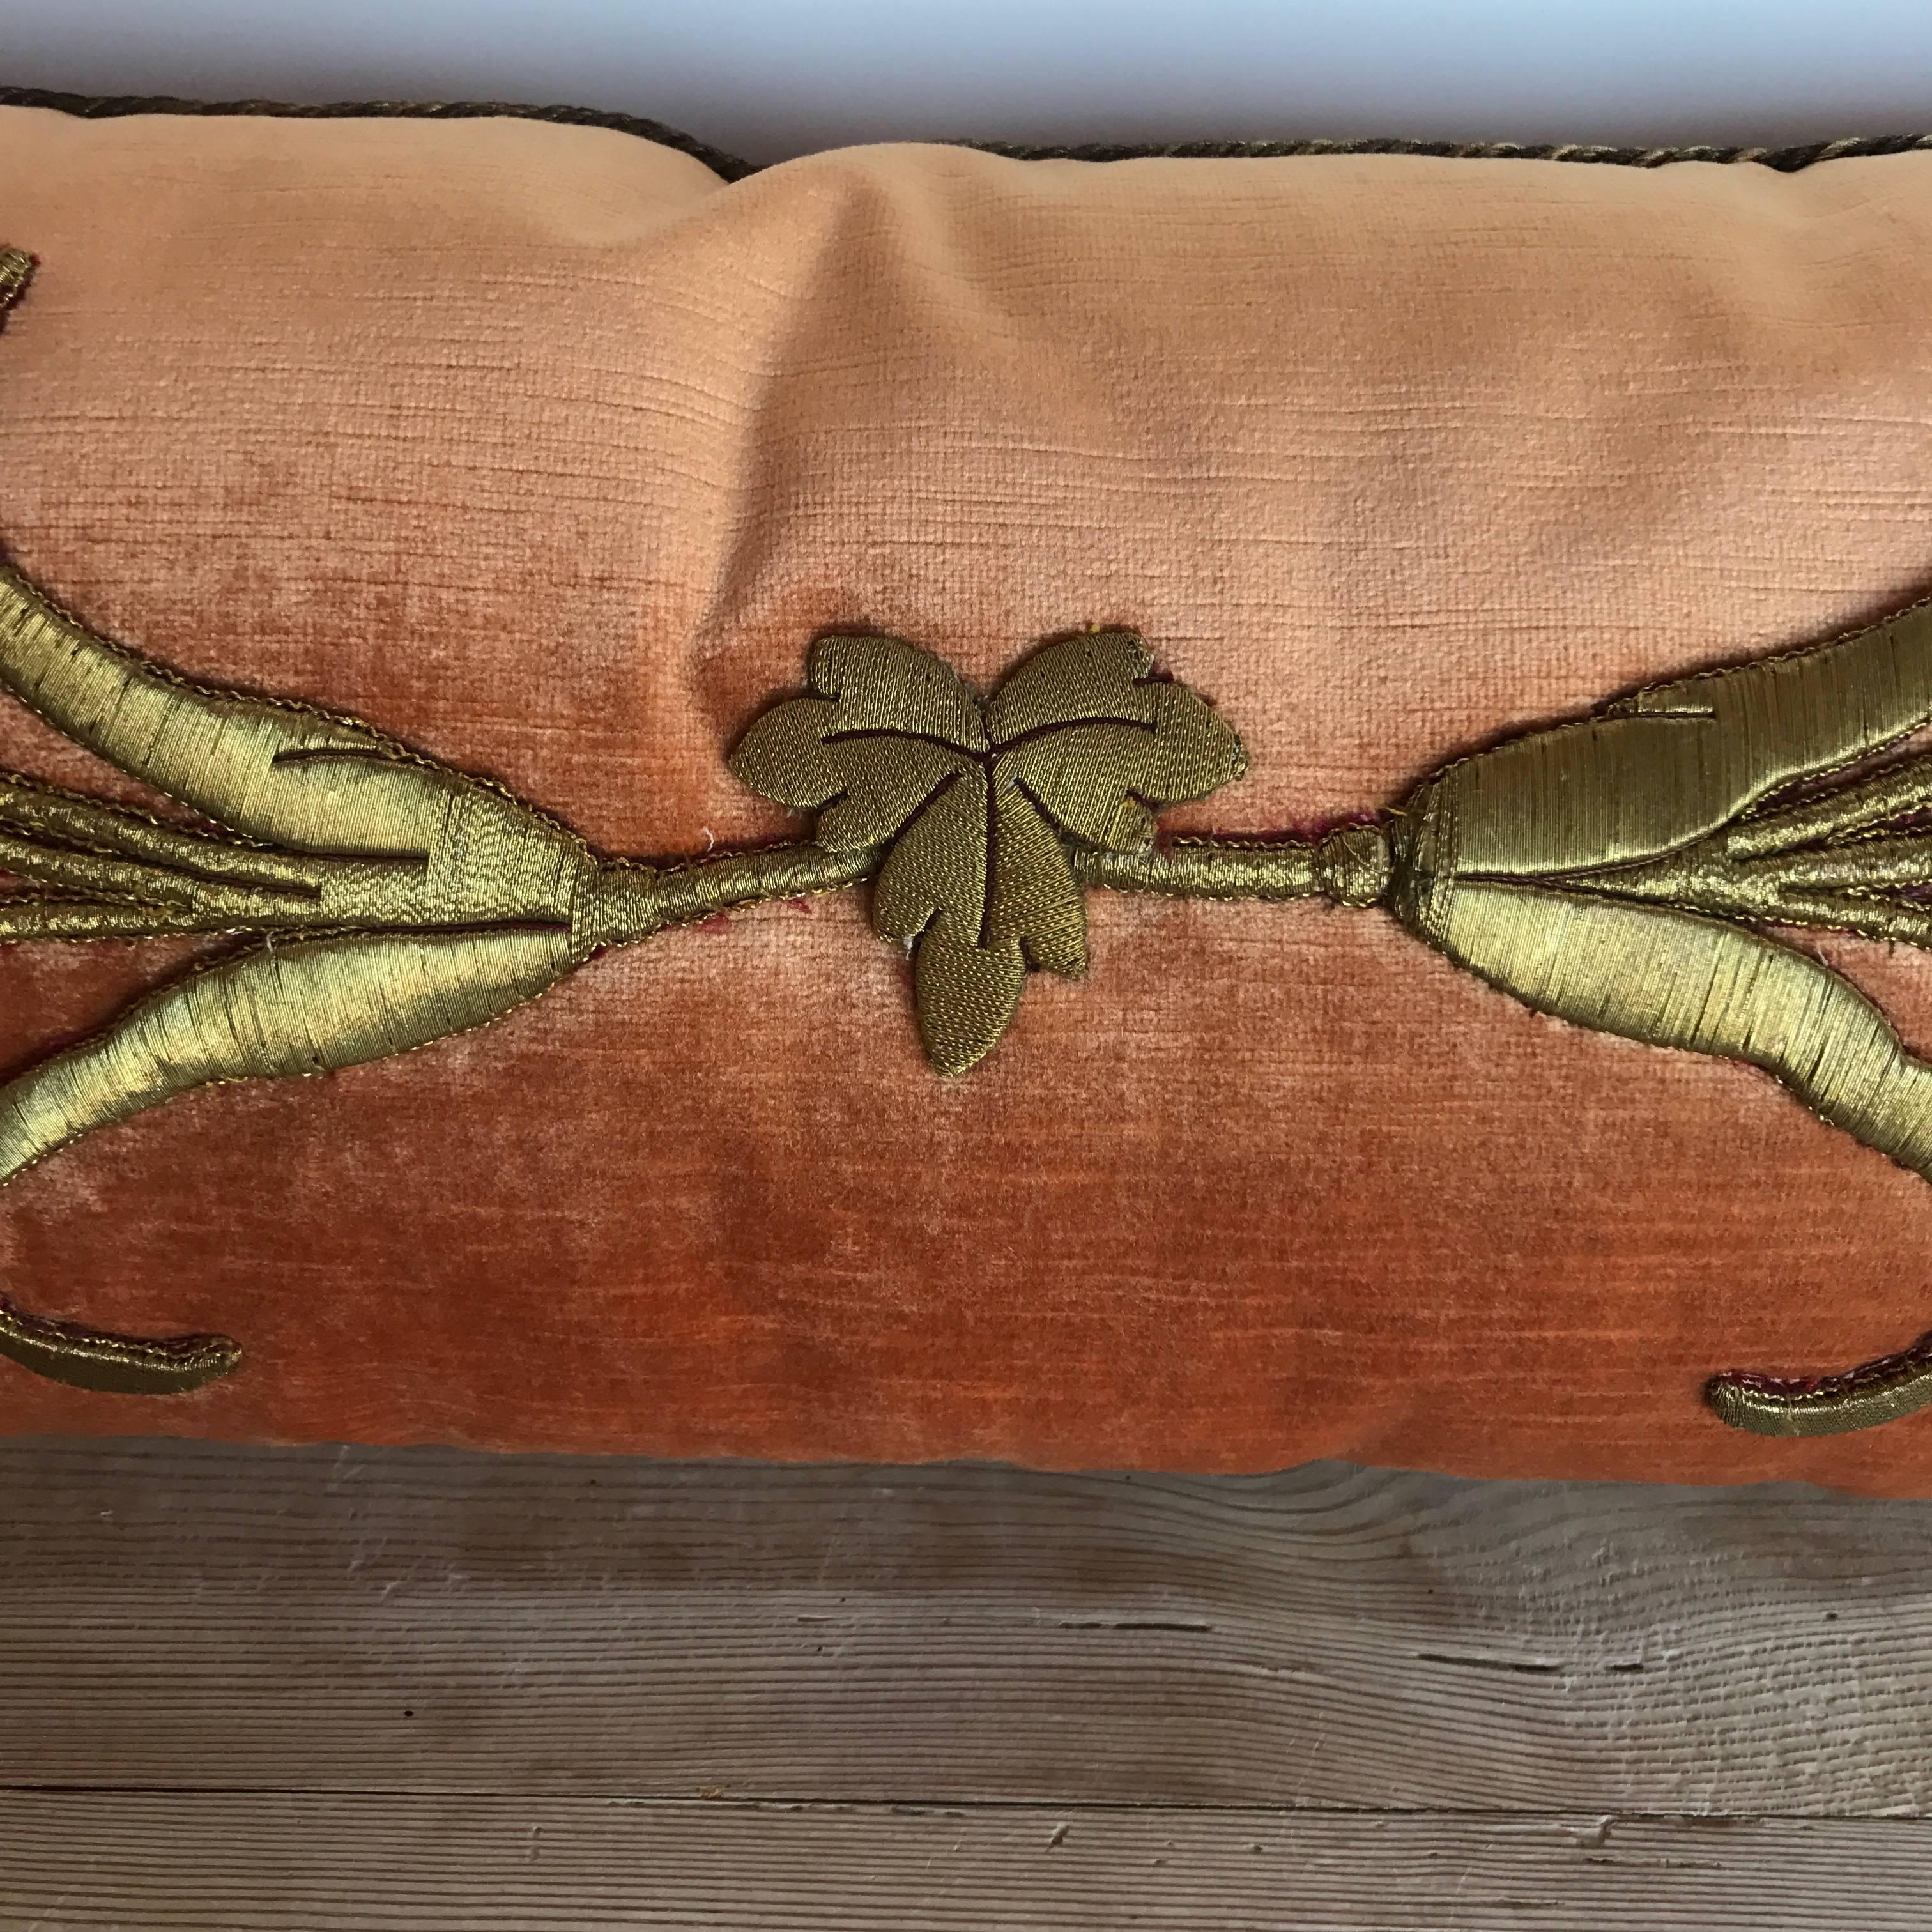 Antique European raised gold metallic embroidery of vining flowers and leaves on melon velvet. Hand trimmed with vintage gold metallic cording knotted in the corners. Down filled.